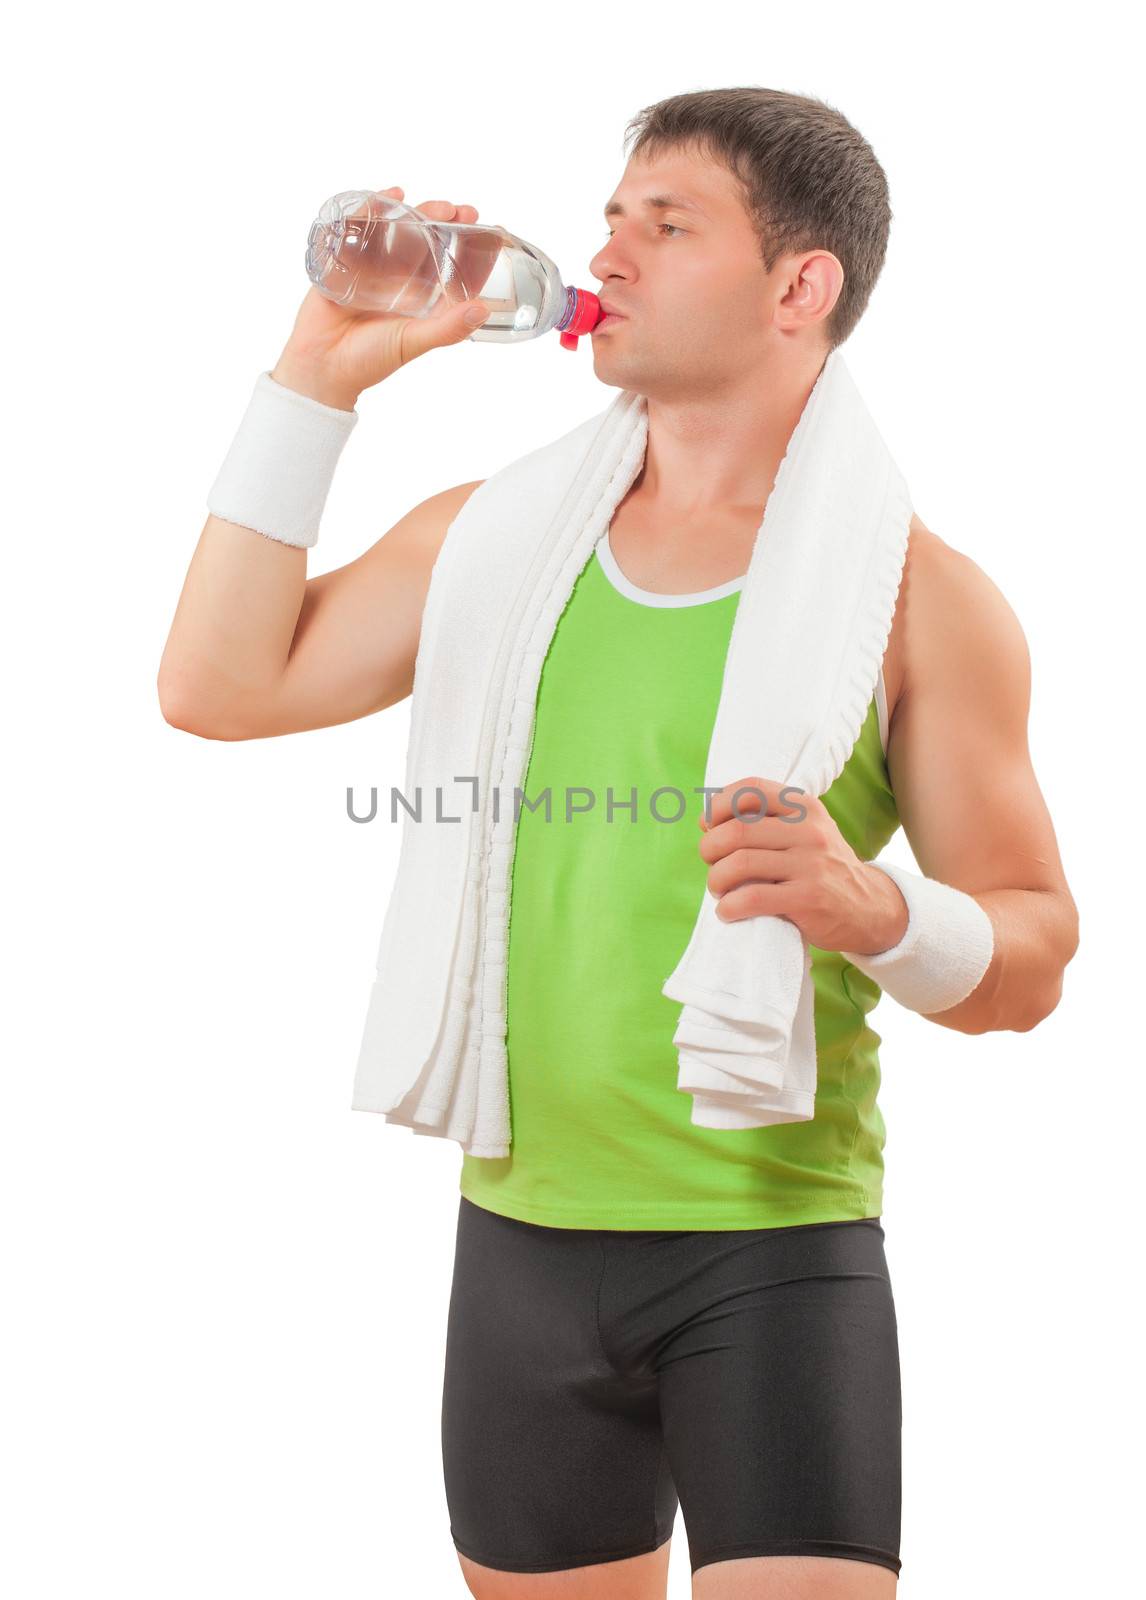 sportsman drinking water from transparent bottle isolated on white background